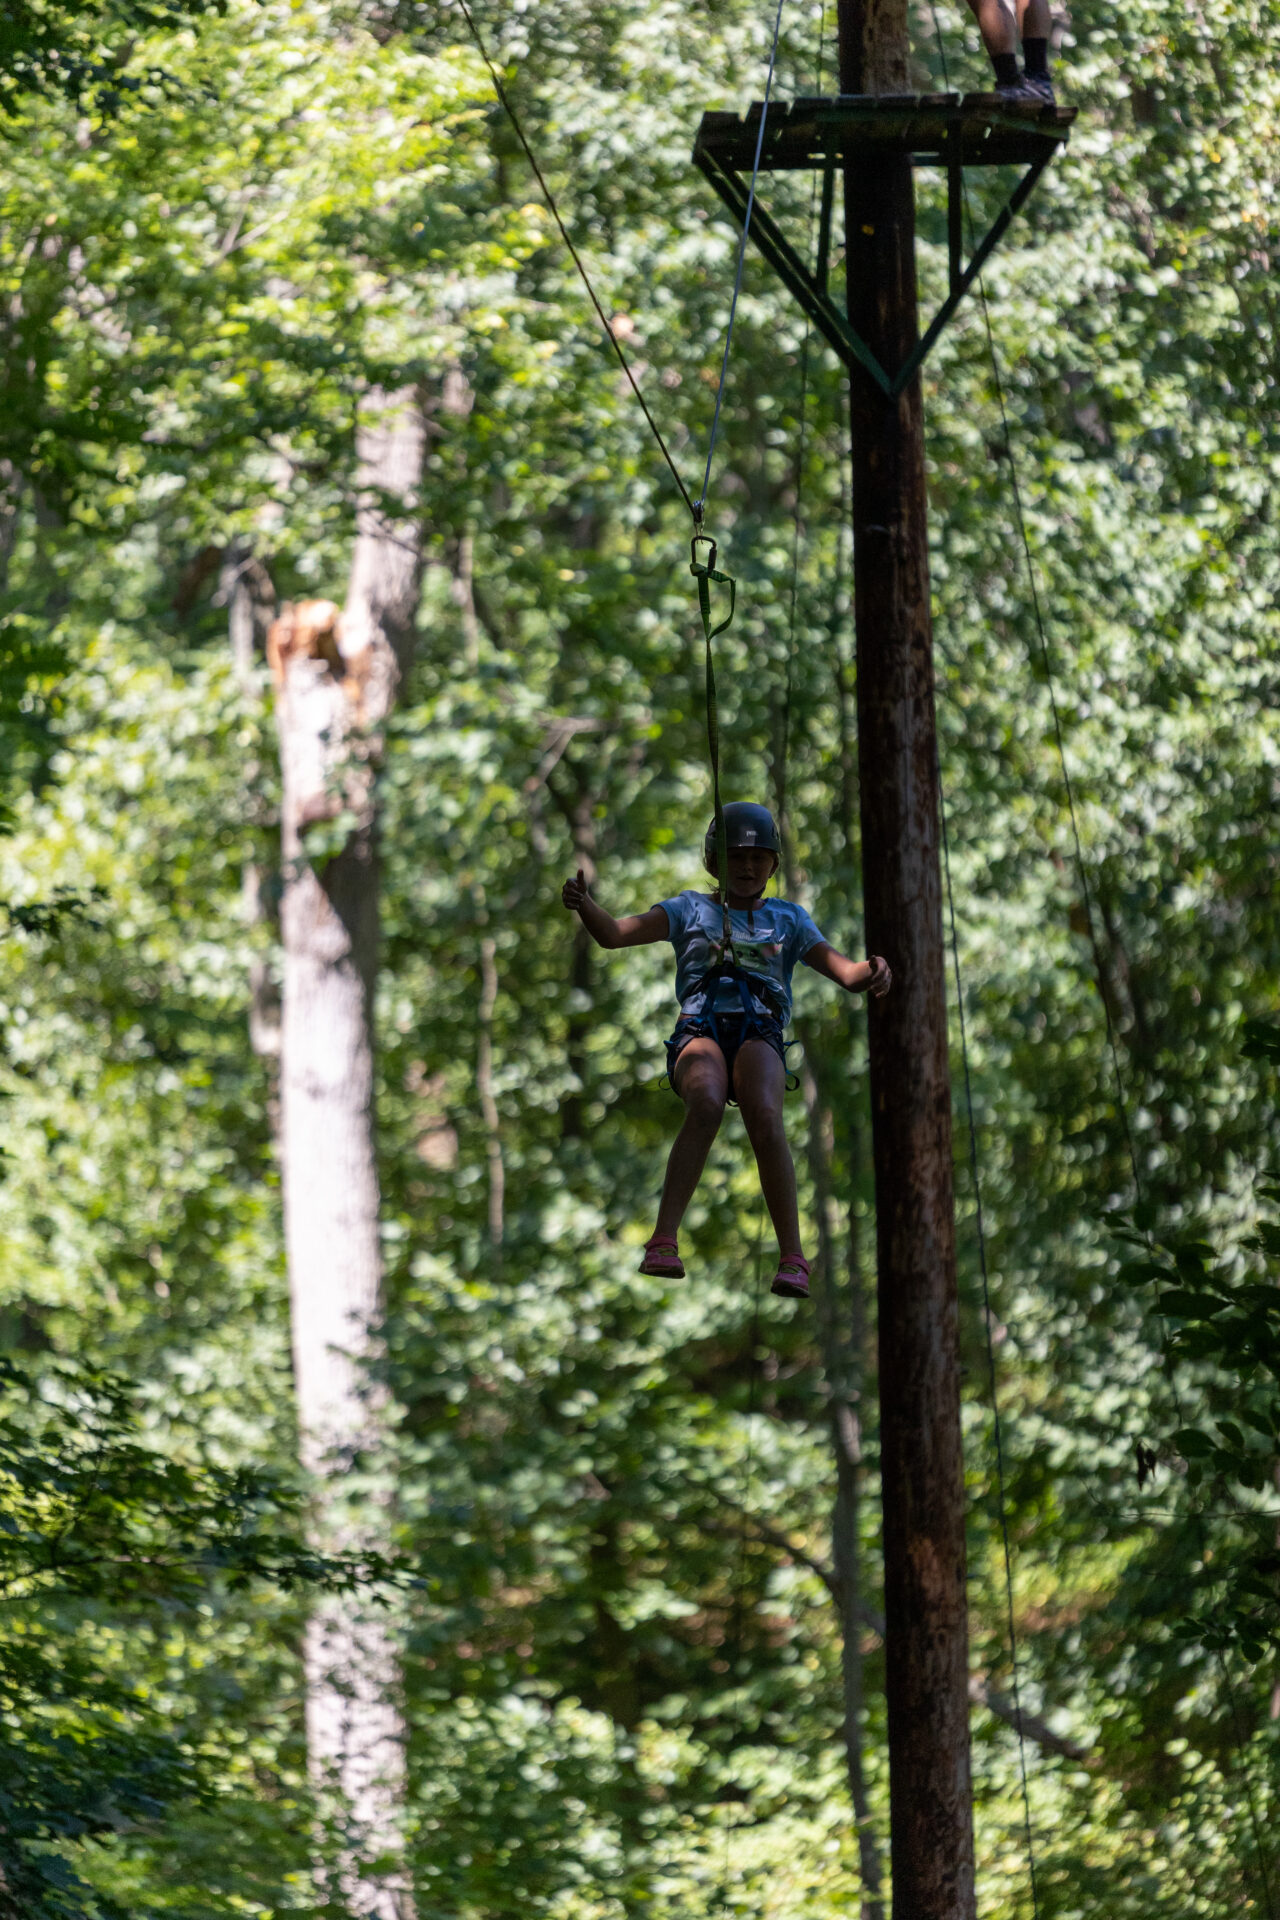 A group of people on a BearTrax zip line in the woods.